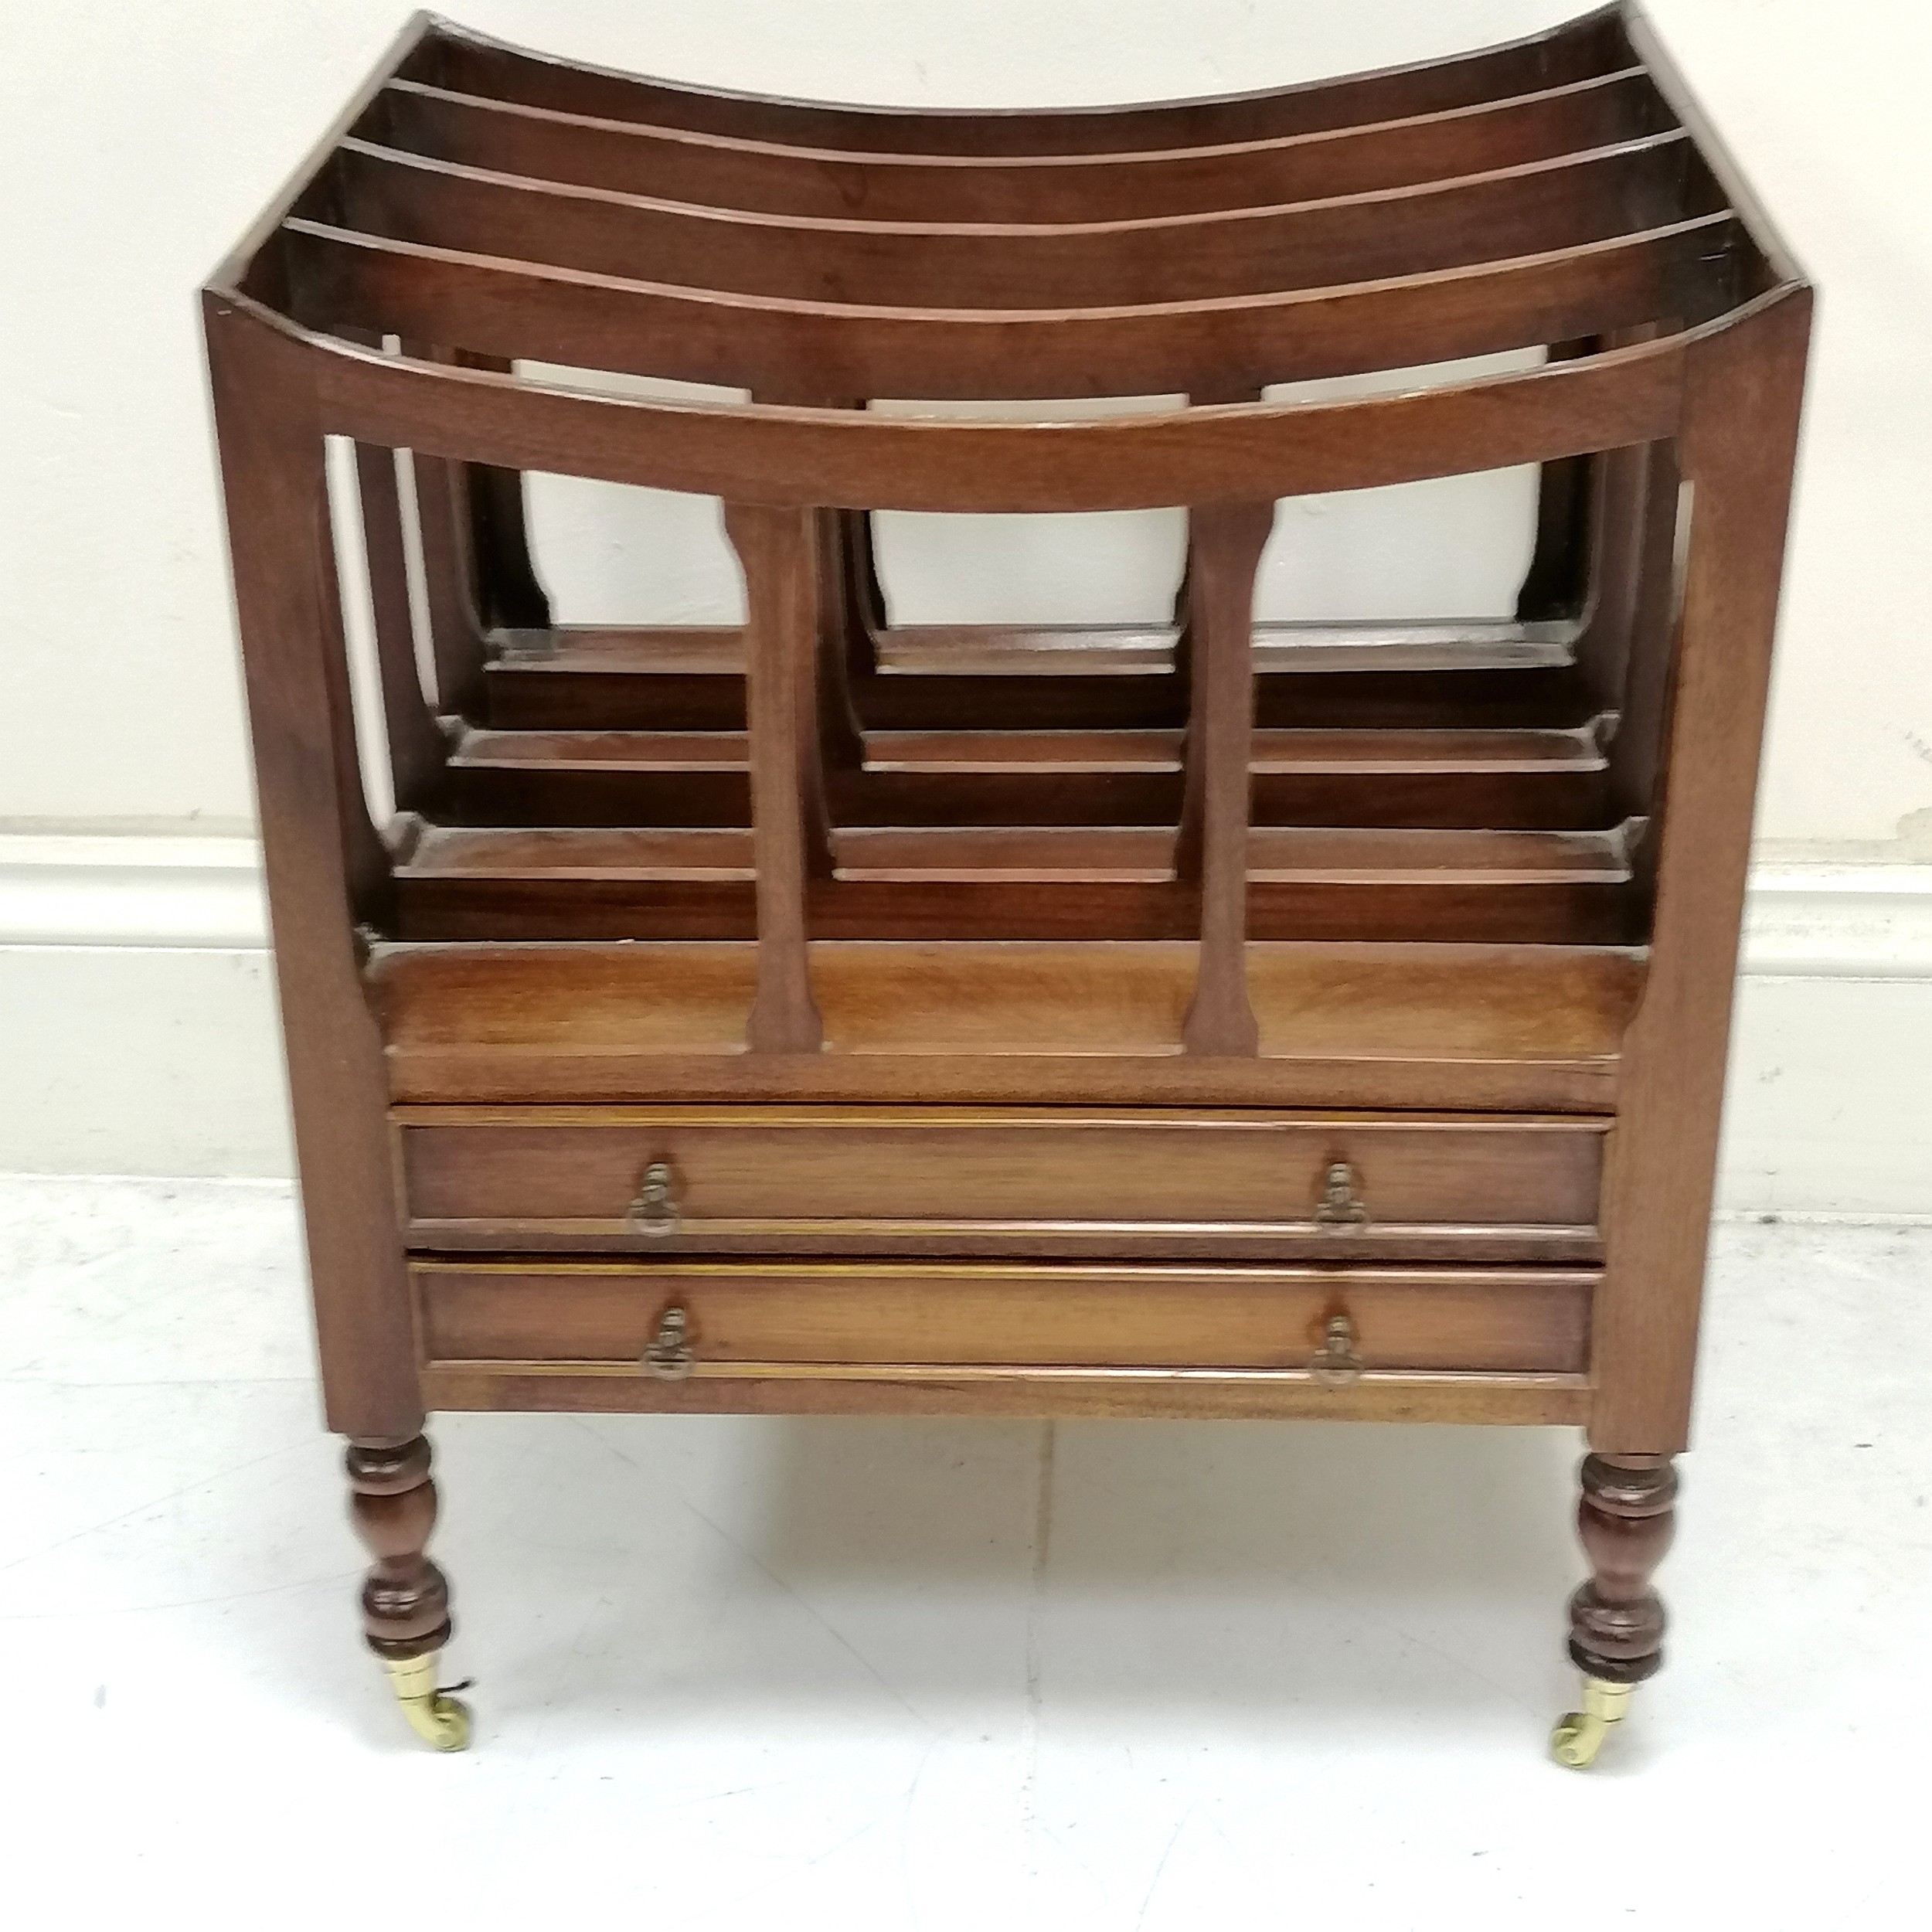 Mahogany reproduction Canterbury fitted with 2 drawers on turned legs terminating on castors, in